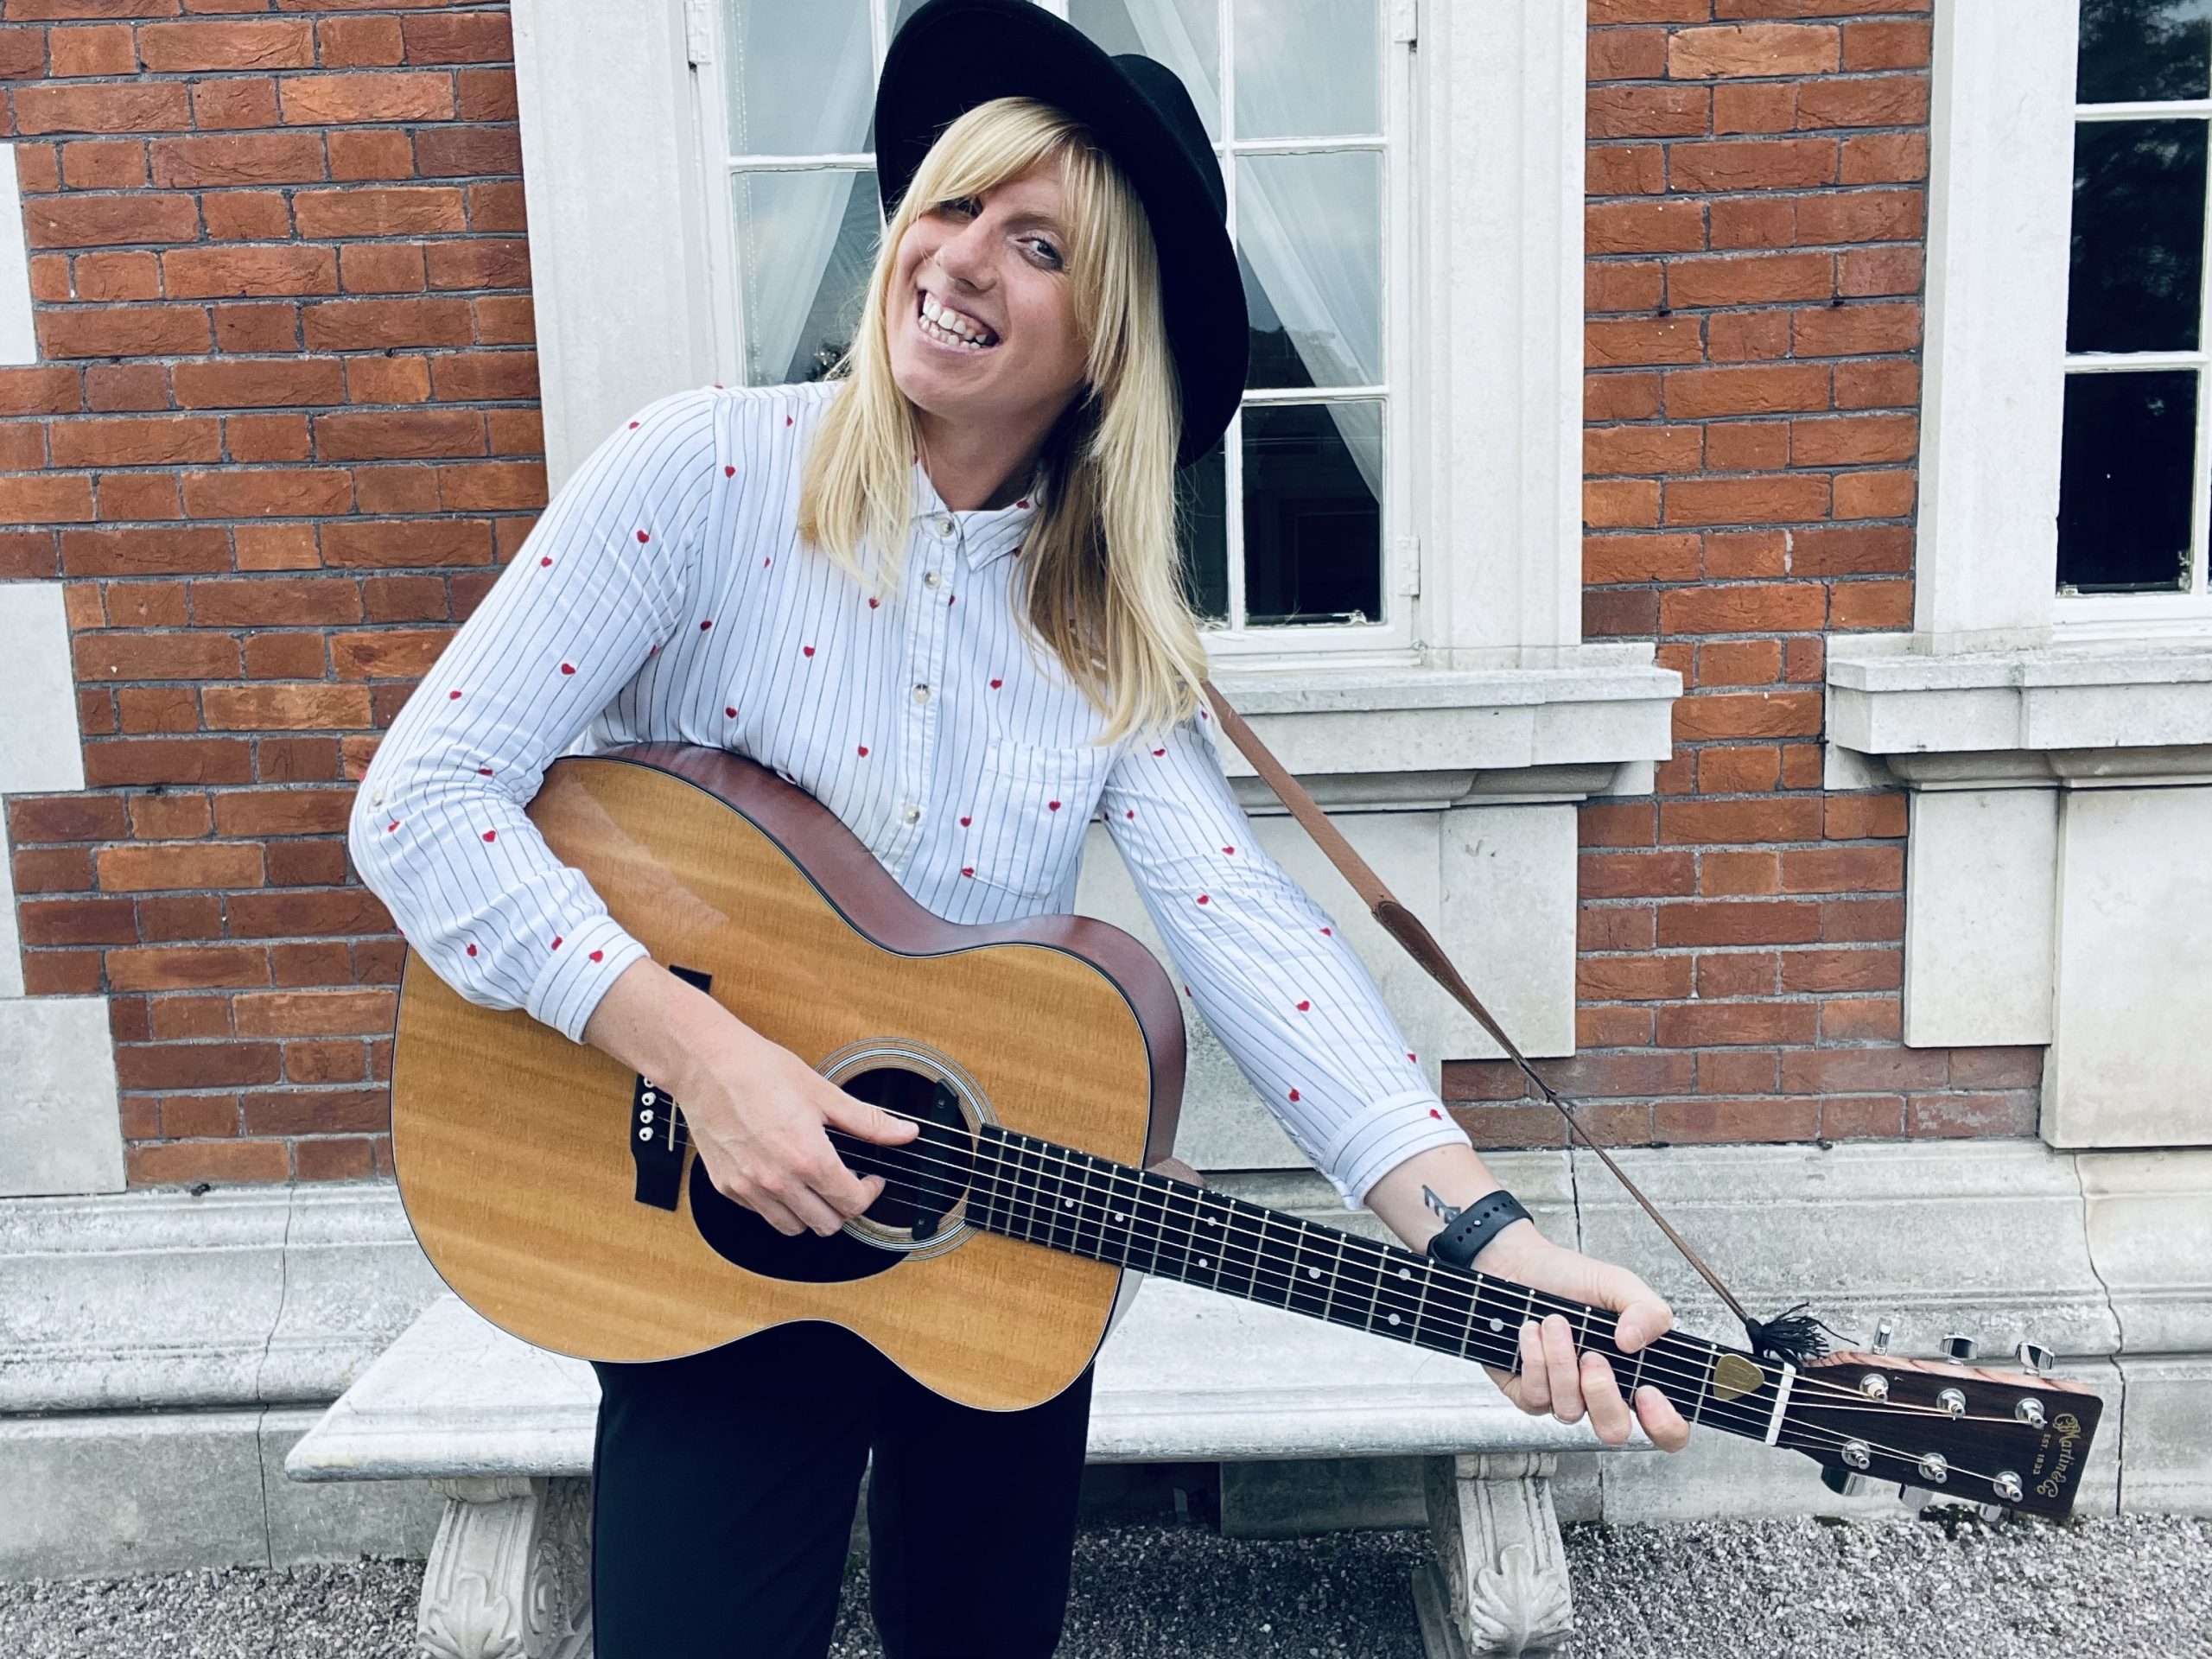 Acoustic wedding singer for hire